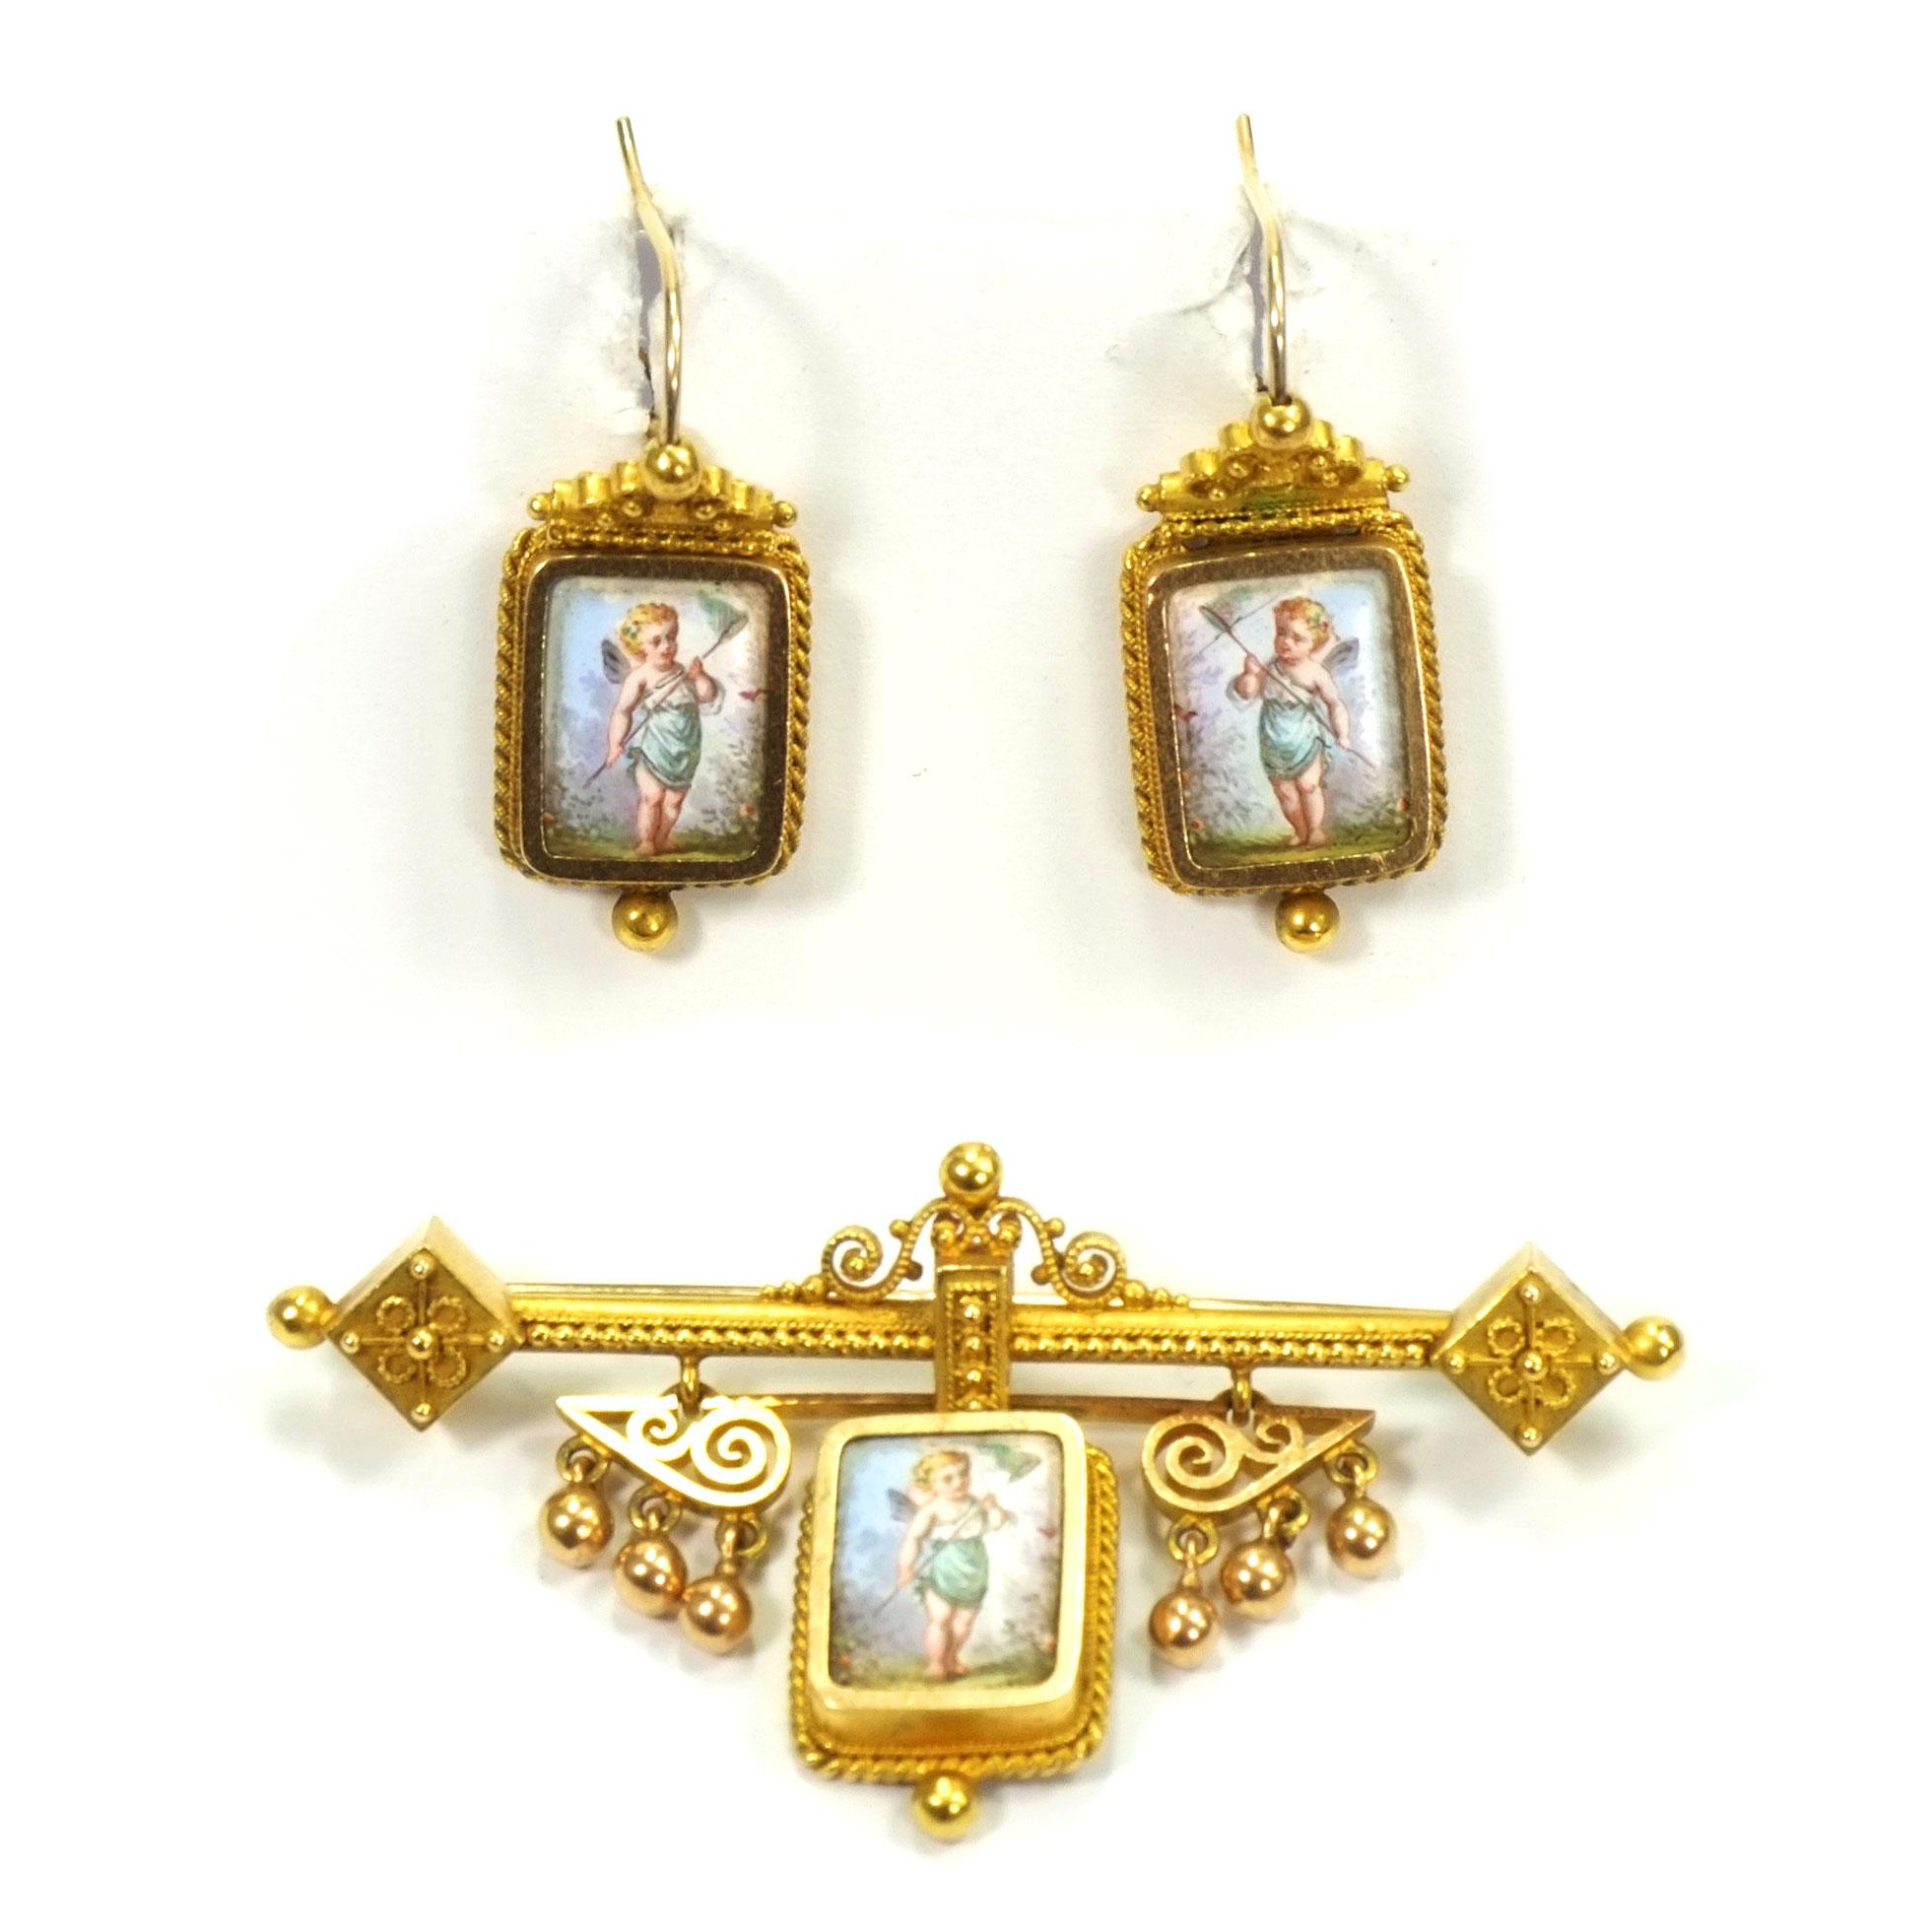 Swiss Gold Demi Parure Earrings and Brooch with miniature painting, circa 1870

Very decorative jewelry set in the Neo-Etruscan style with filigree gold wire soldering and granulations, elaborately worked and each set with a porcelain plaque. A